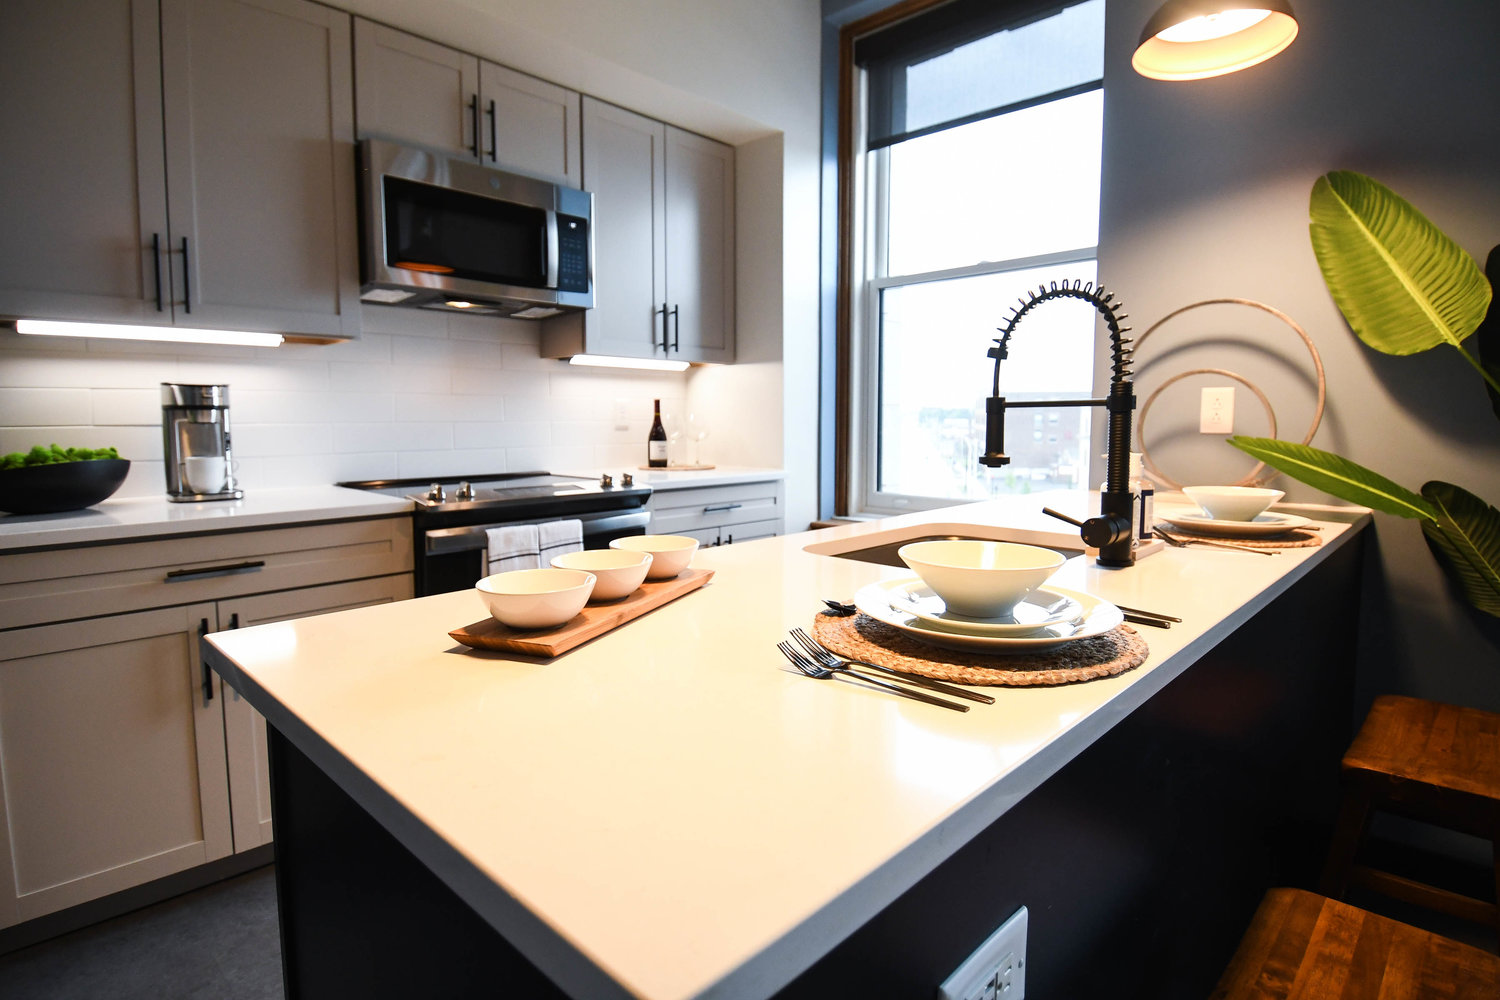 Kitchen space at Sullivan Apartments located at the former Commercial Travelers Insurance building at 70 Genesee St.